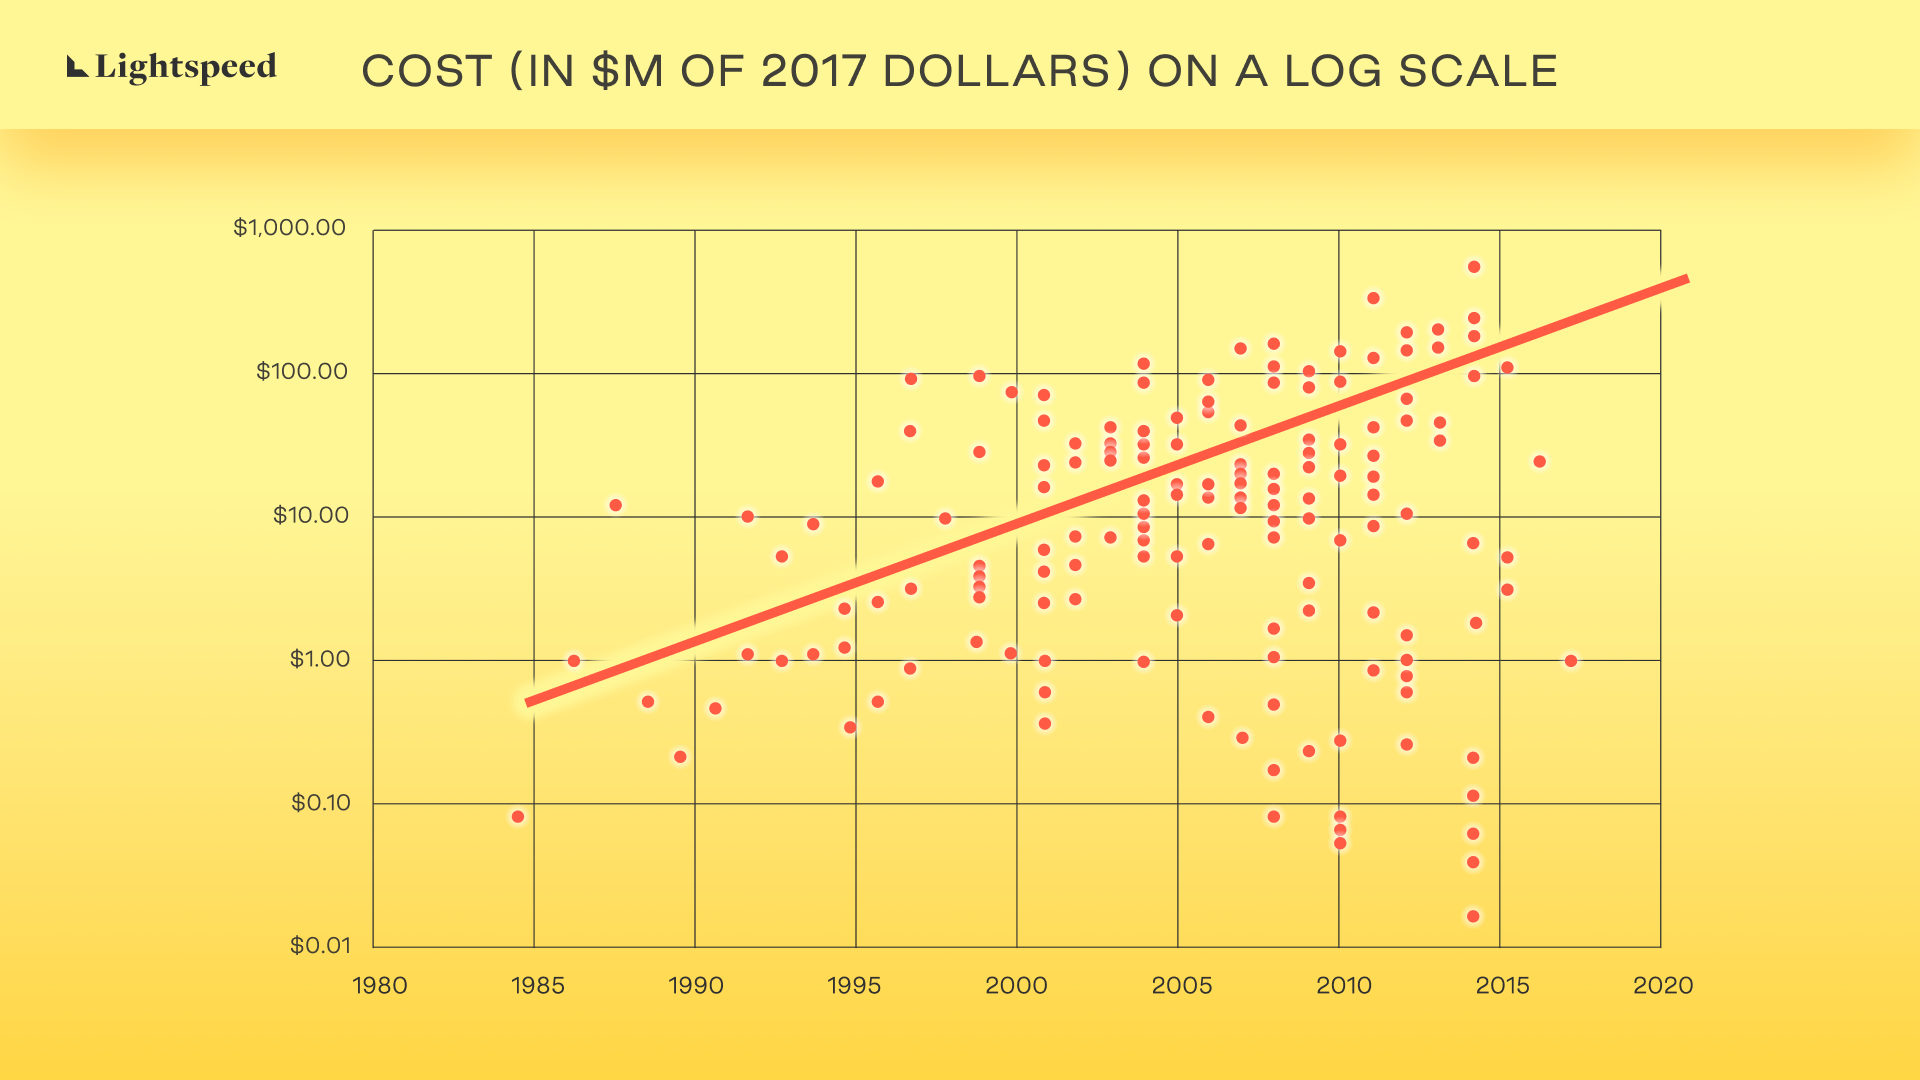 Lightspeed Cost on a log scale 2017 in us dollars